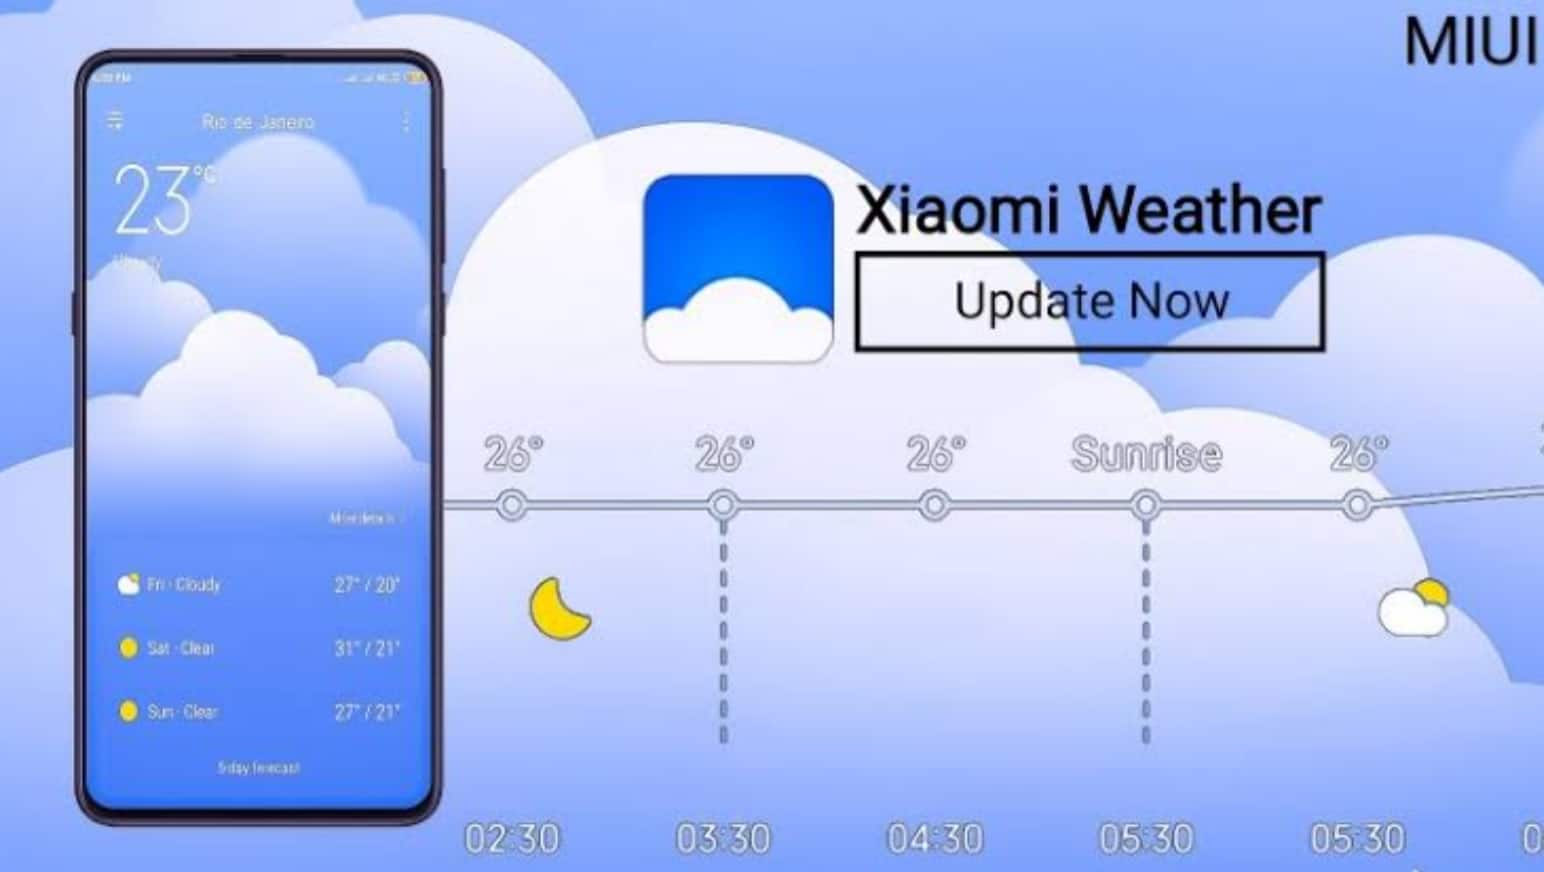 Xiaomi Weather App Receives a New Update With UI Changes and Bug Fixes